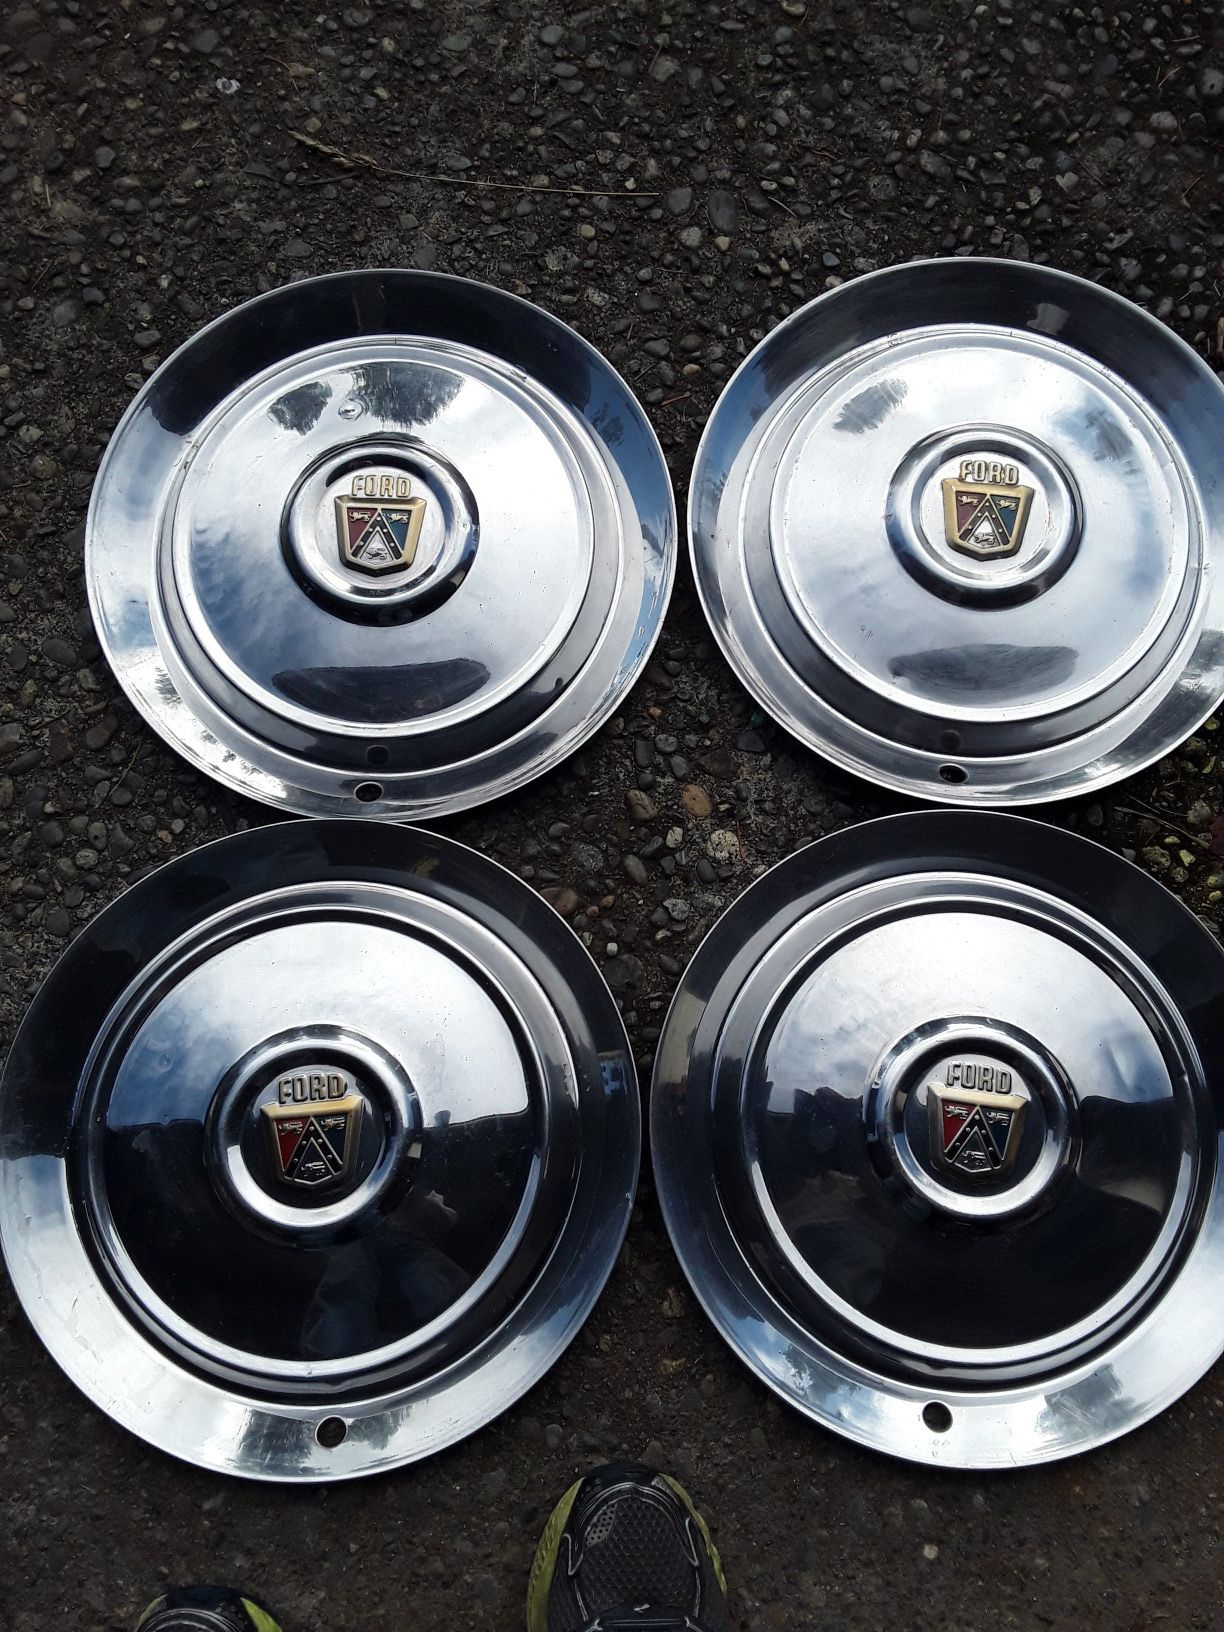 1954 Ford Hubcaps